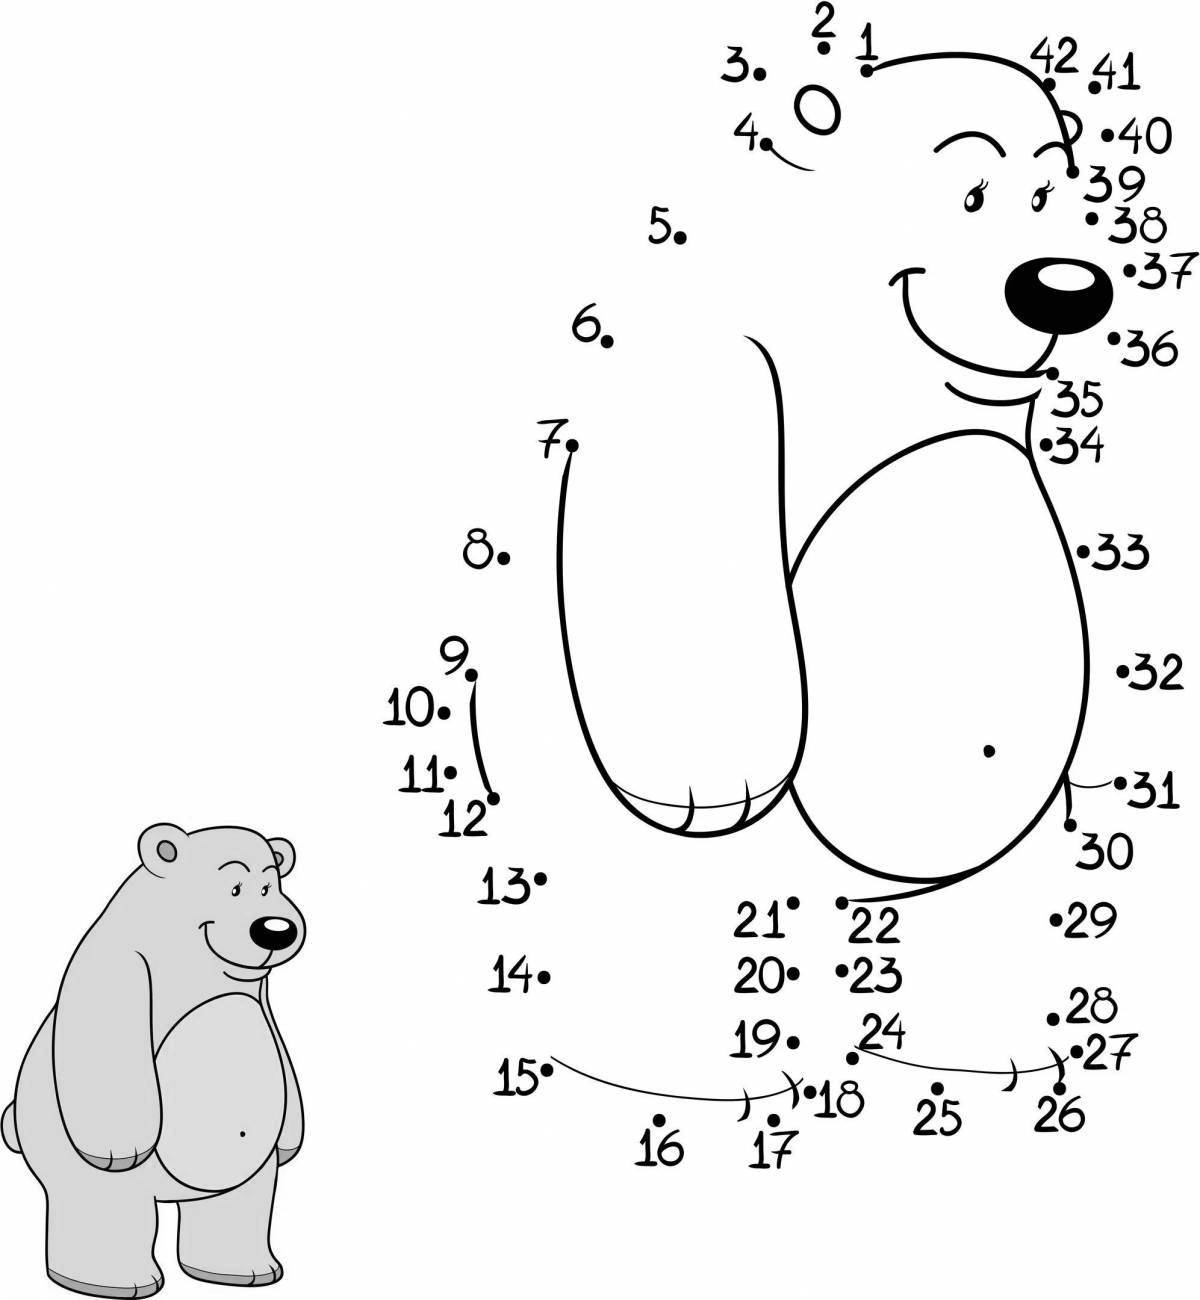 Coloring cuddly bear by numbers